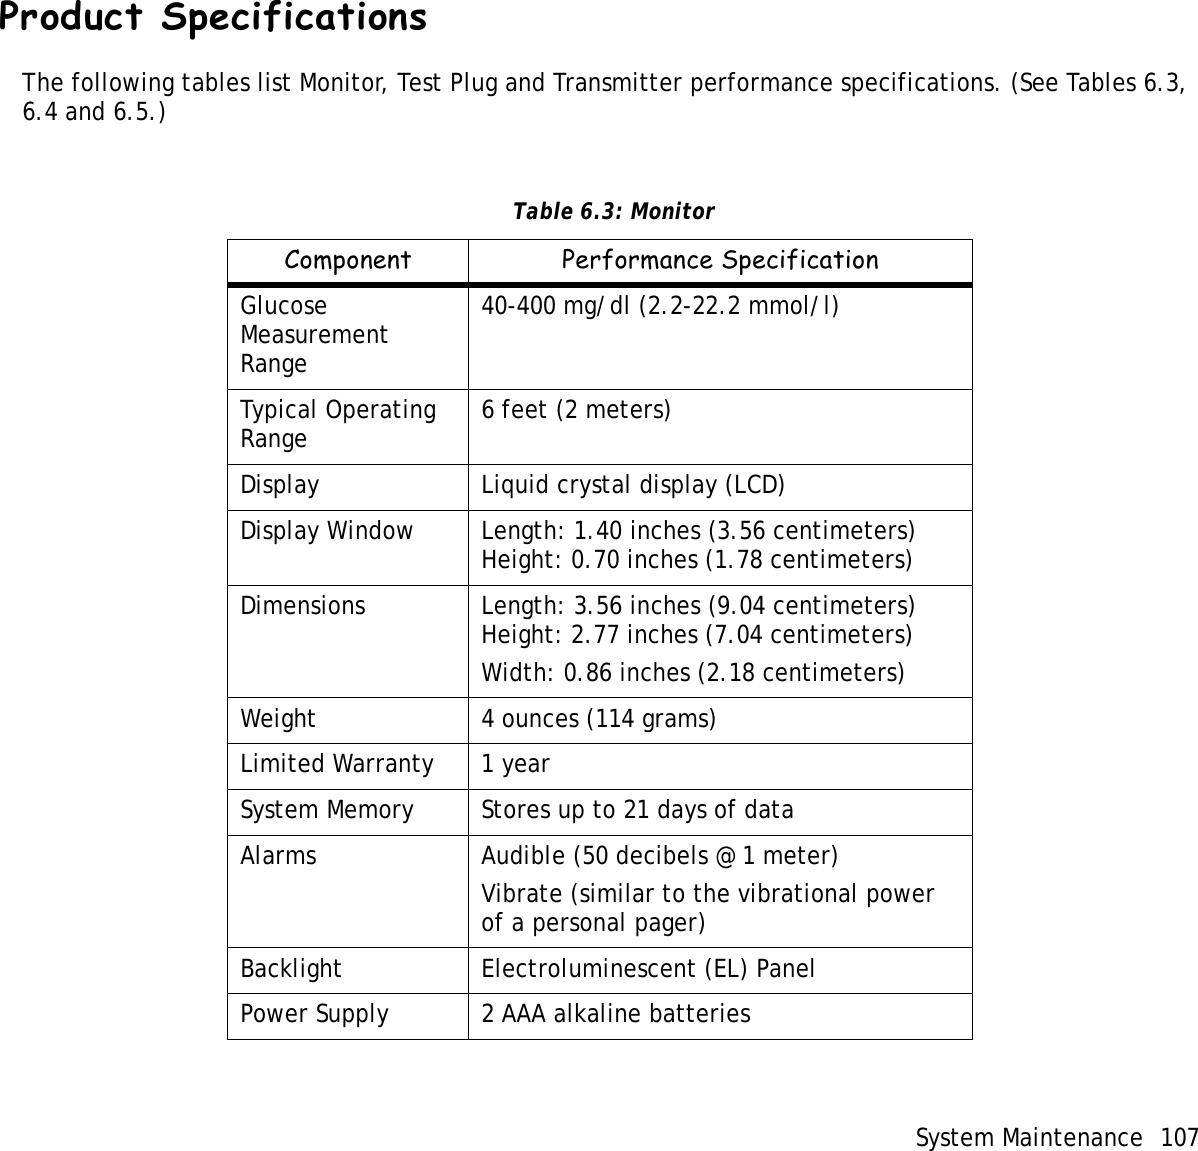 System Maintenance 107 Product SpecificationsThe following tables list Monitor, Test Plug and Transmitter performance specifications. (See Tables 6.3, 6.4 and 6.5.)  Table 6.3: MonitorComponent Performance SpecificationGlucose Measurement Range40-400 mg/dl (2.2-22.2 mmol/l)Typical Operating Range 6 feet (2 meters)Display Liquid crystal display (LCD)Display Window Length: 1.40 inches (3.56 centimeters)Height: 0.70 inches (1.78 centimeters)Dimensions Length: 3.56 inches (9.04 centimeters)Height: 2.77 inches (7.04 centimeters)Width: 0.86 inches (2.18 centimeters)Weight 4 ounces (114 grams)Limited Warranty 1 yearSystem Memory Stores up to 21 days of dataAlarms Audible (50 decibels @ 1 meter)Vibrate (similar to the vibrational power of a personal pager)Backlight Electroluminescent (EL) PanelPower Supply 2 AAA alkaline batteries